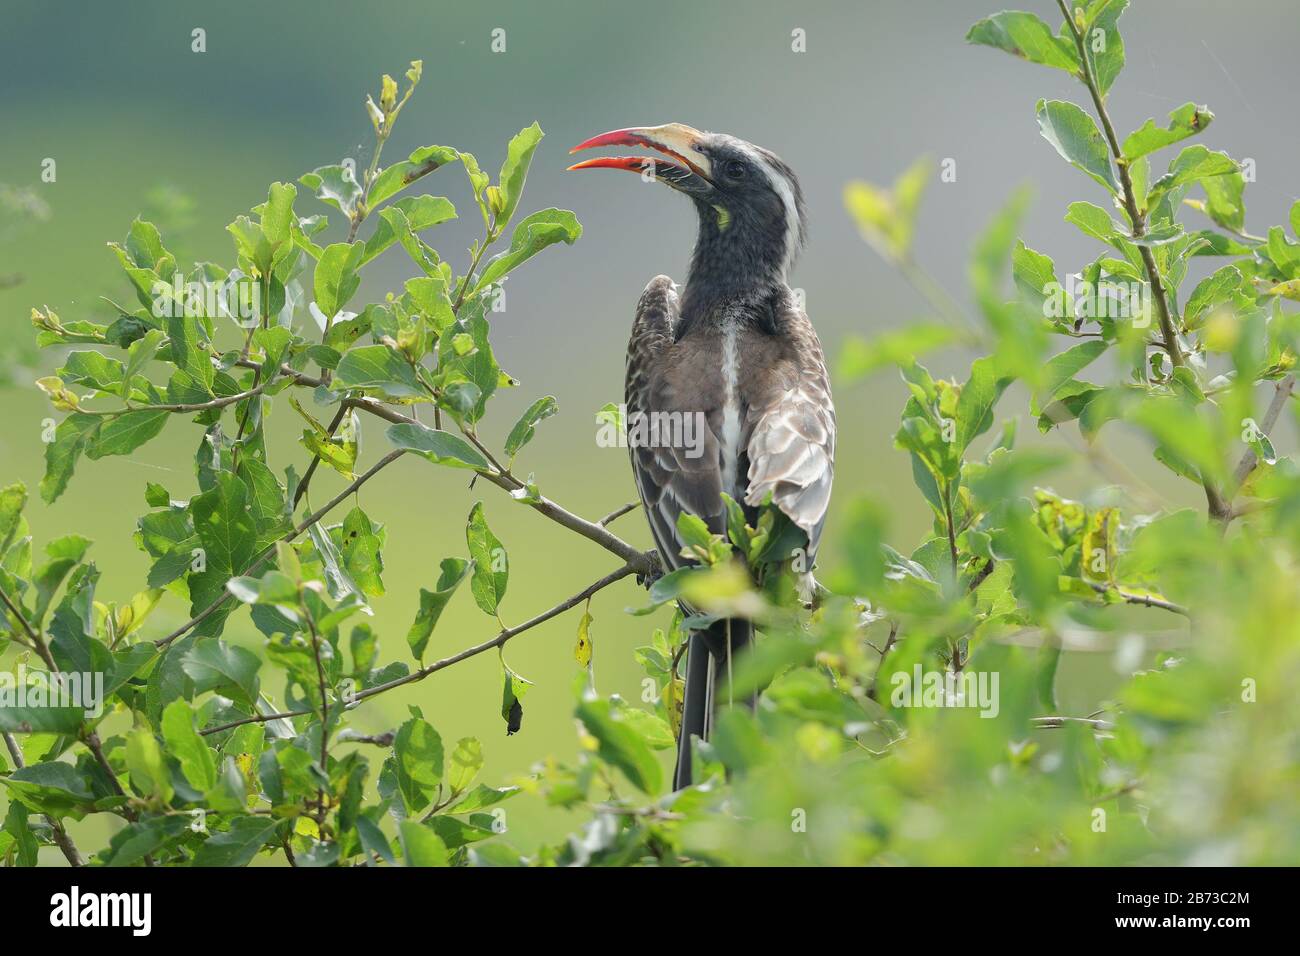 The African grey hornbill is a member of the hornbill family of tropical near-passerine birds found in the Old World. Stock Photo